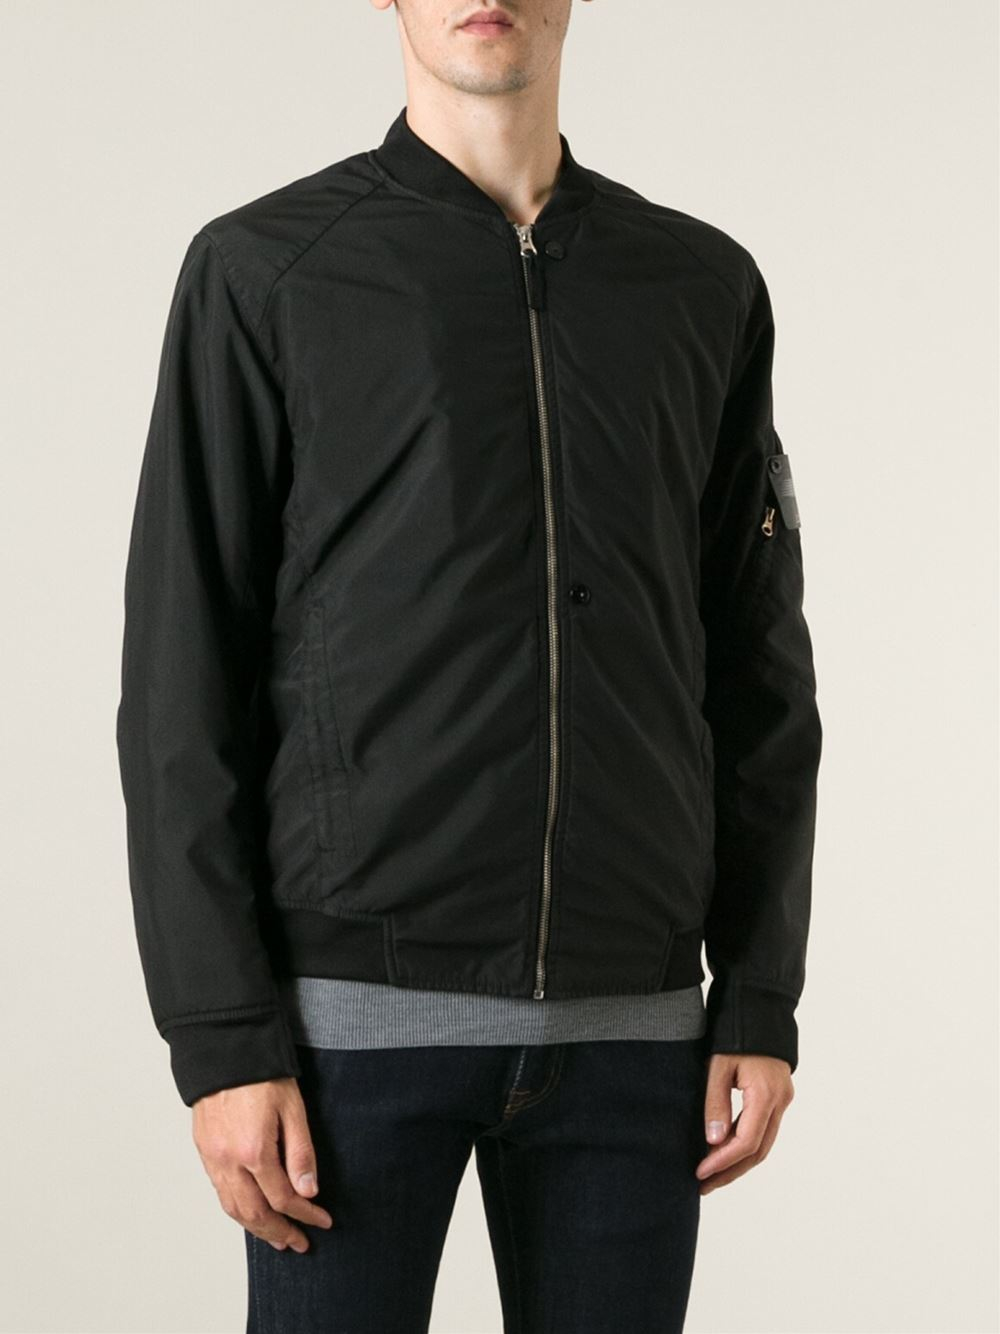 Lyst - Stone Island Fitted Bomber Jacket in Black for Men